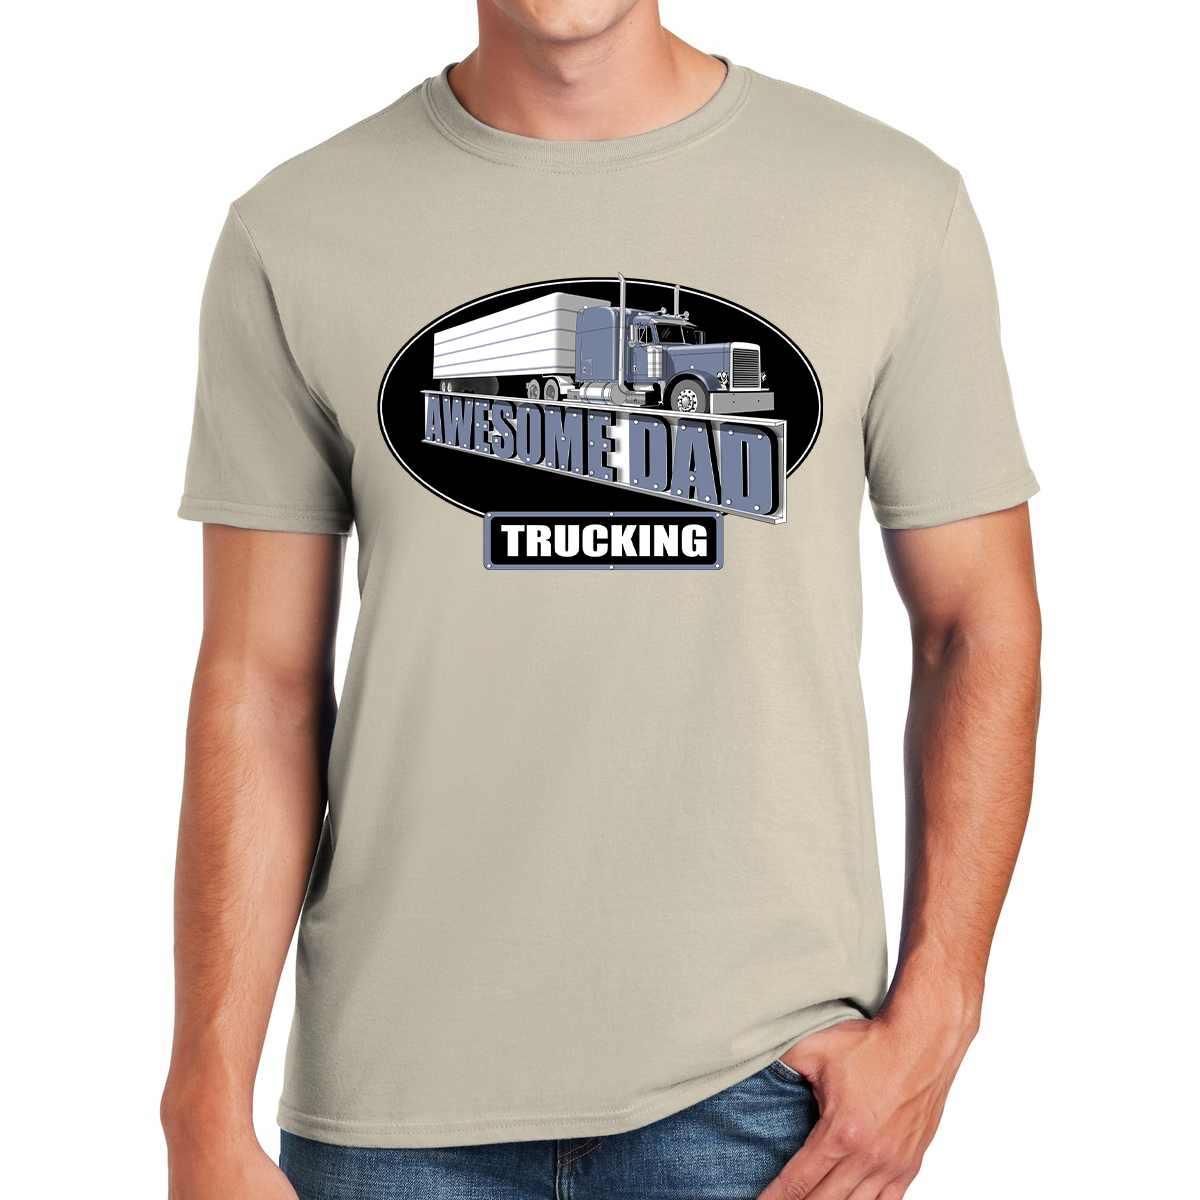 Awesome Dad Trucking Delivering Love One Mile At A Time Gift For Dads T-shirt